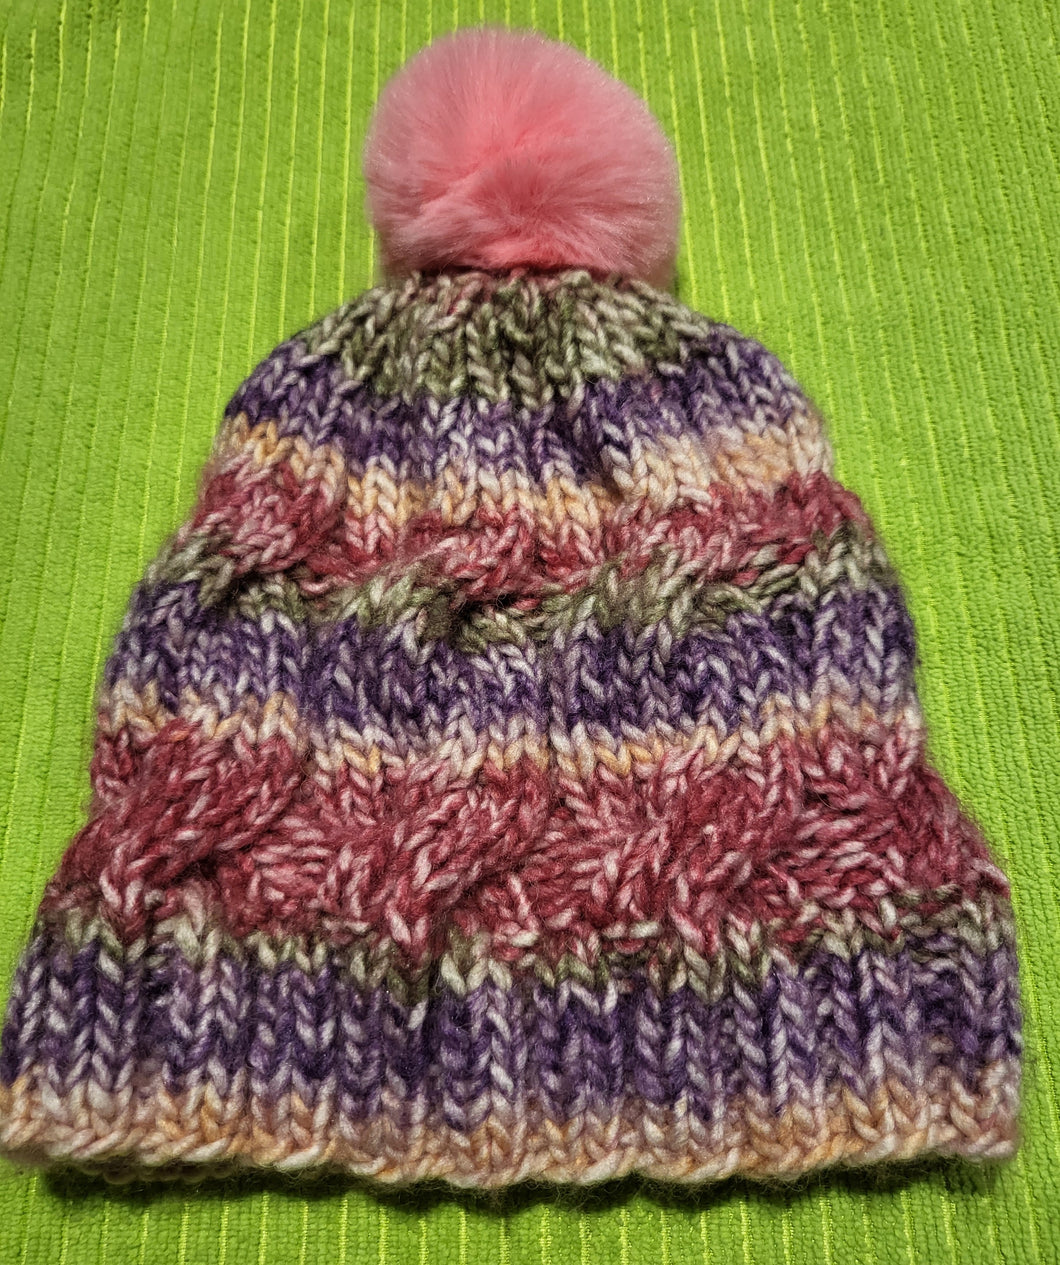 Beanie - Young girl - cable knit -pinks, mauves, greens